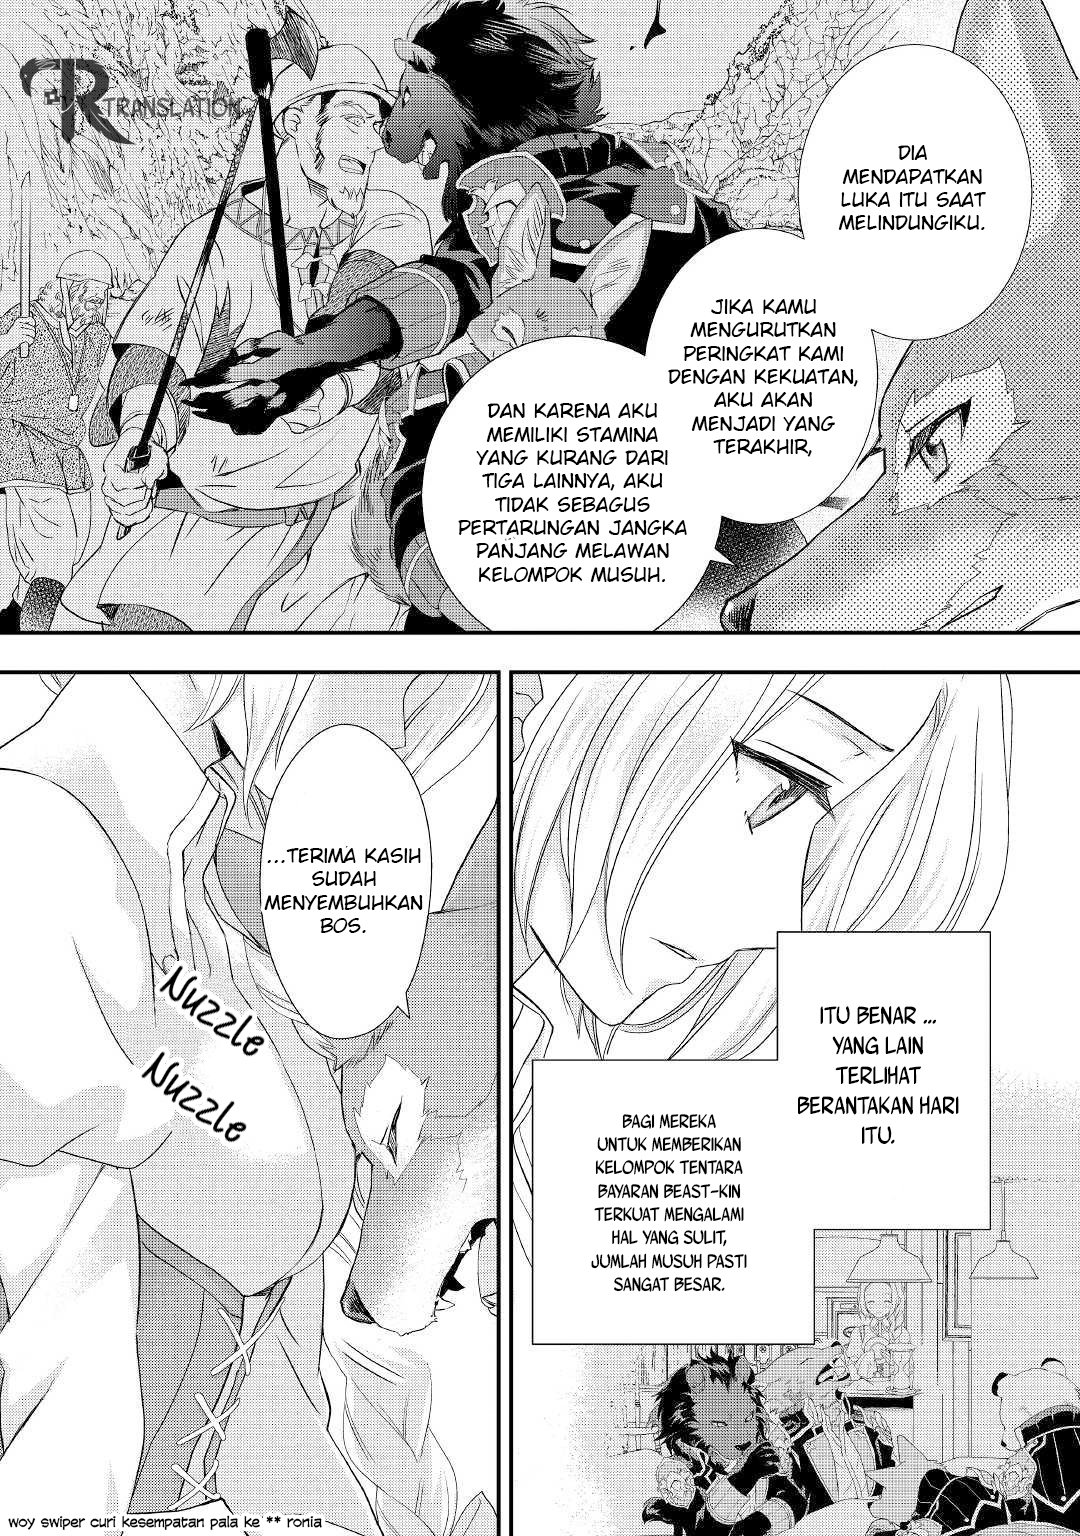 Milady Just Wants to Relax Chapter 010.2